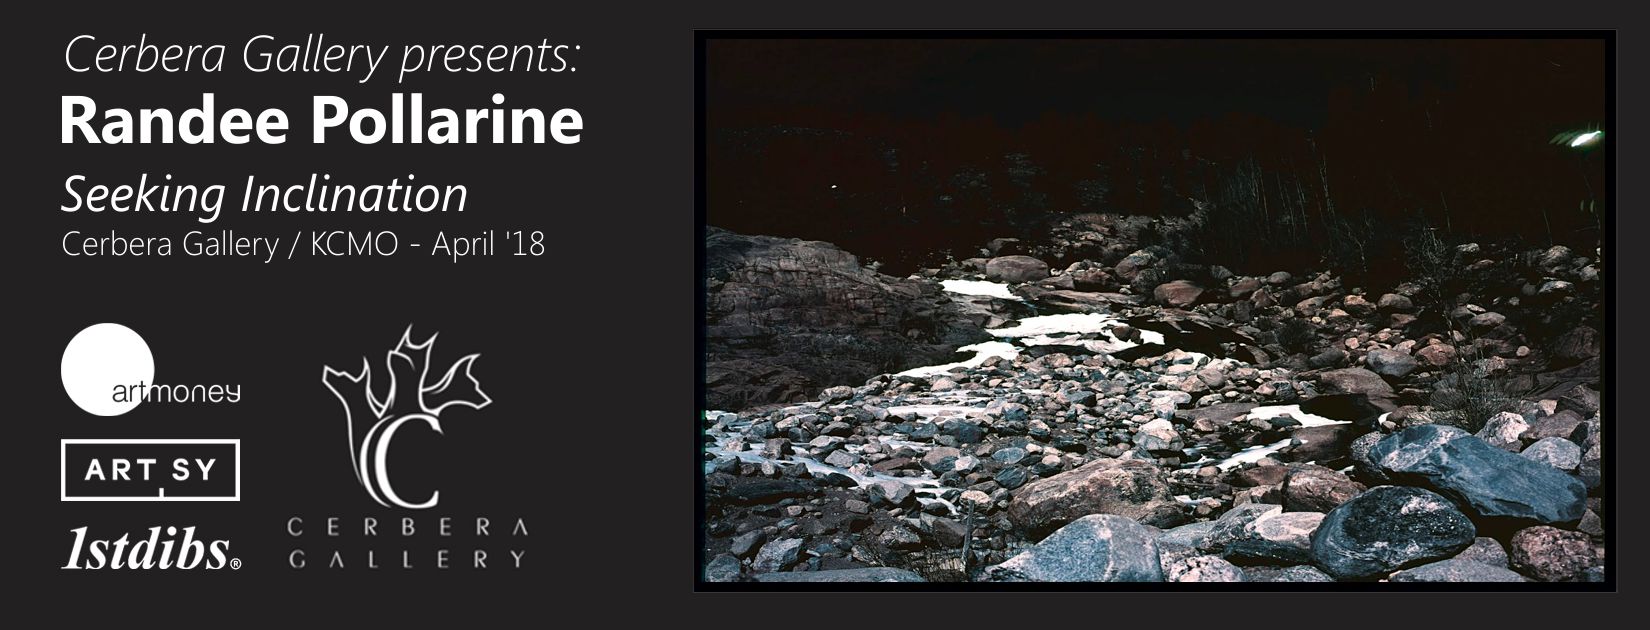 Cerbera Gallery presents: Seeking Inclination | Questions of the uncanny Landscapes, from near and far Places by Randee Pollarine | April '18